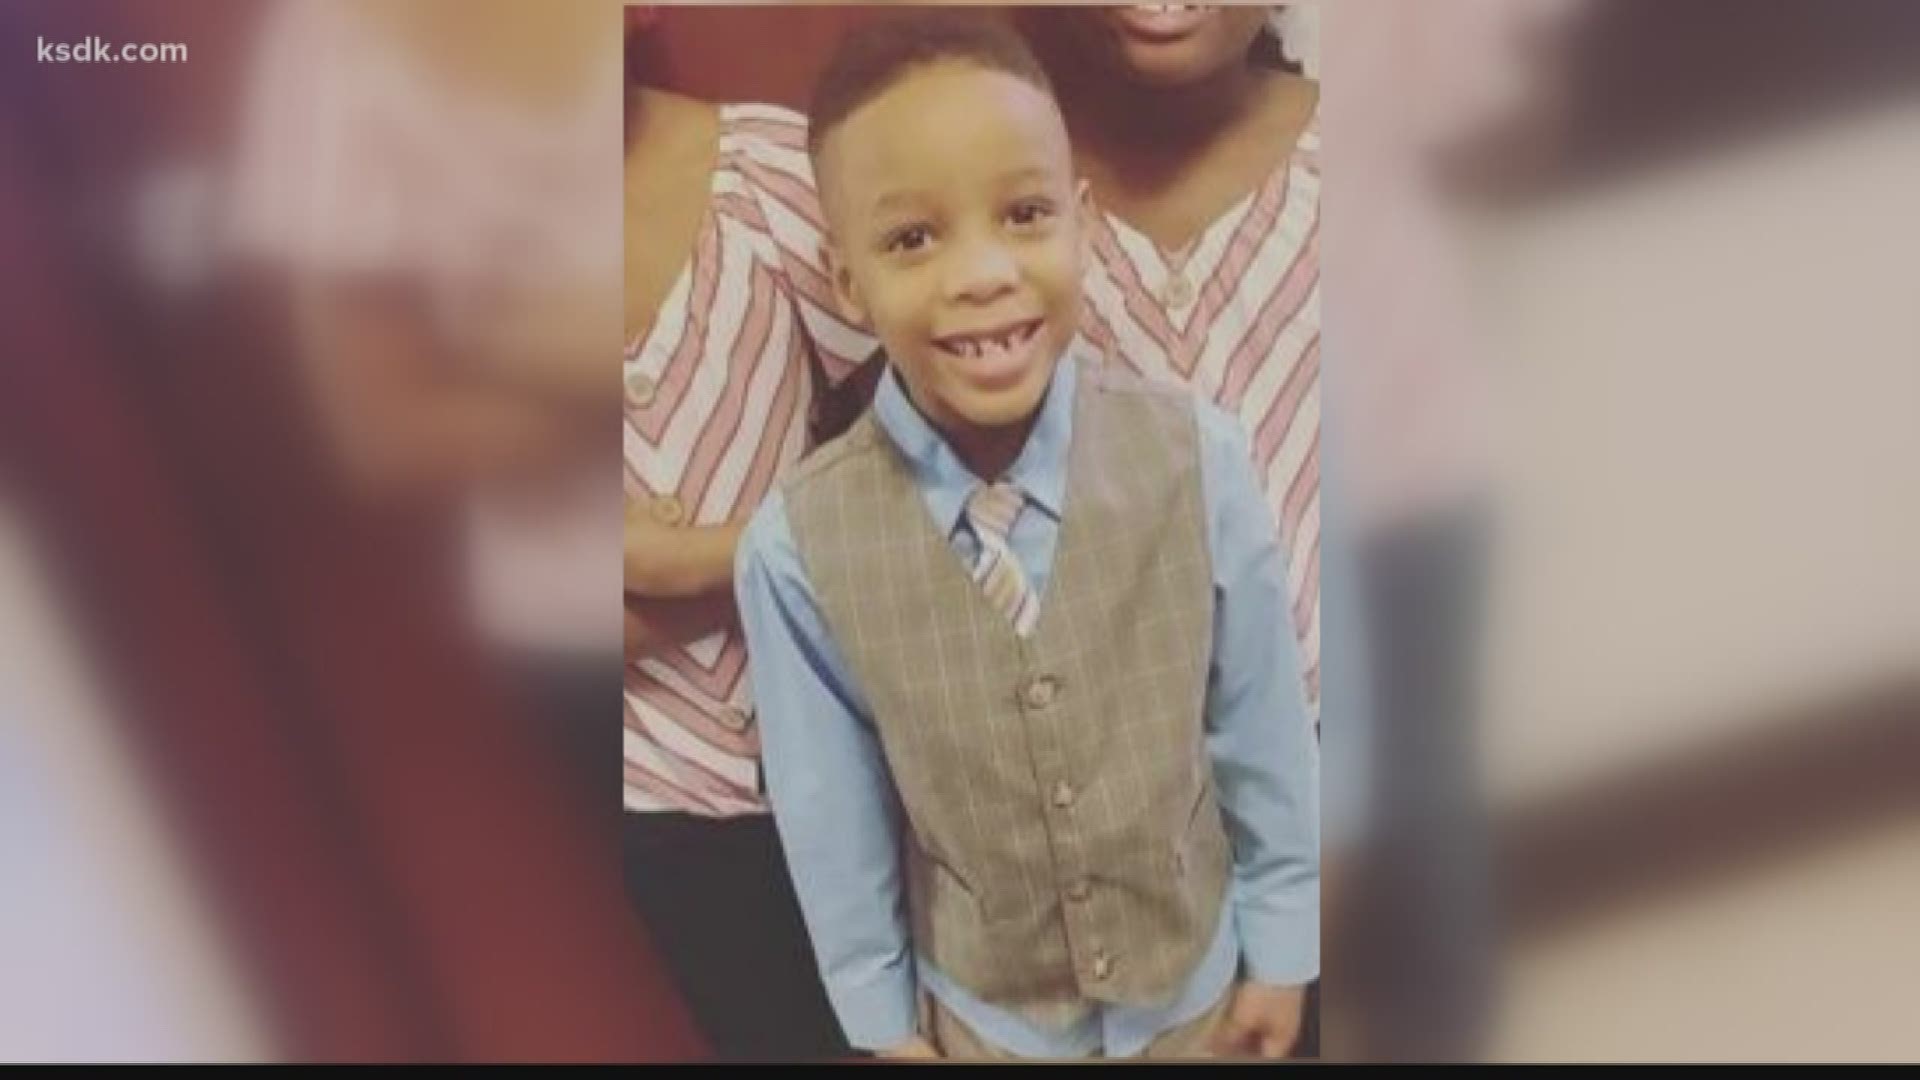 David Birchfield III, 6, was pronounced dead at a hospital on Saturday after the car he was in was shot up.